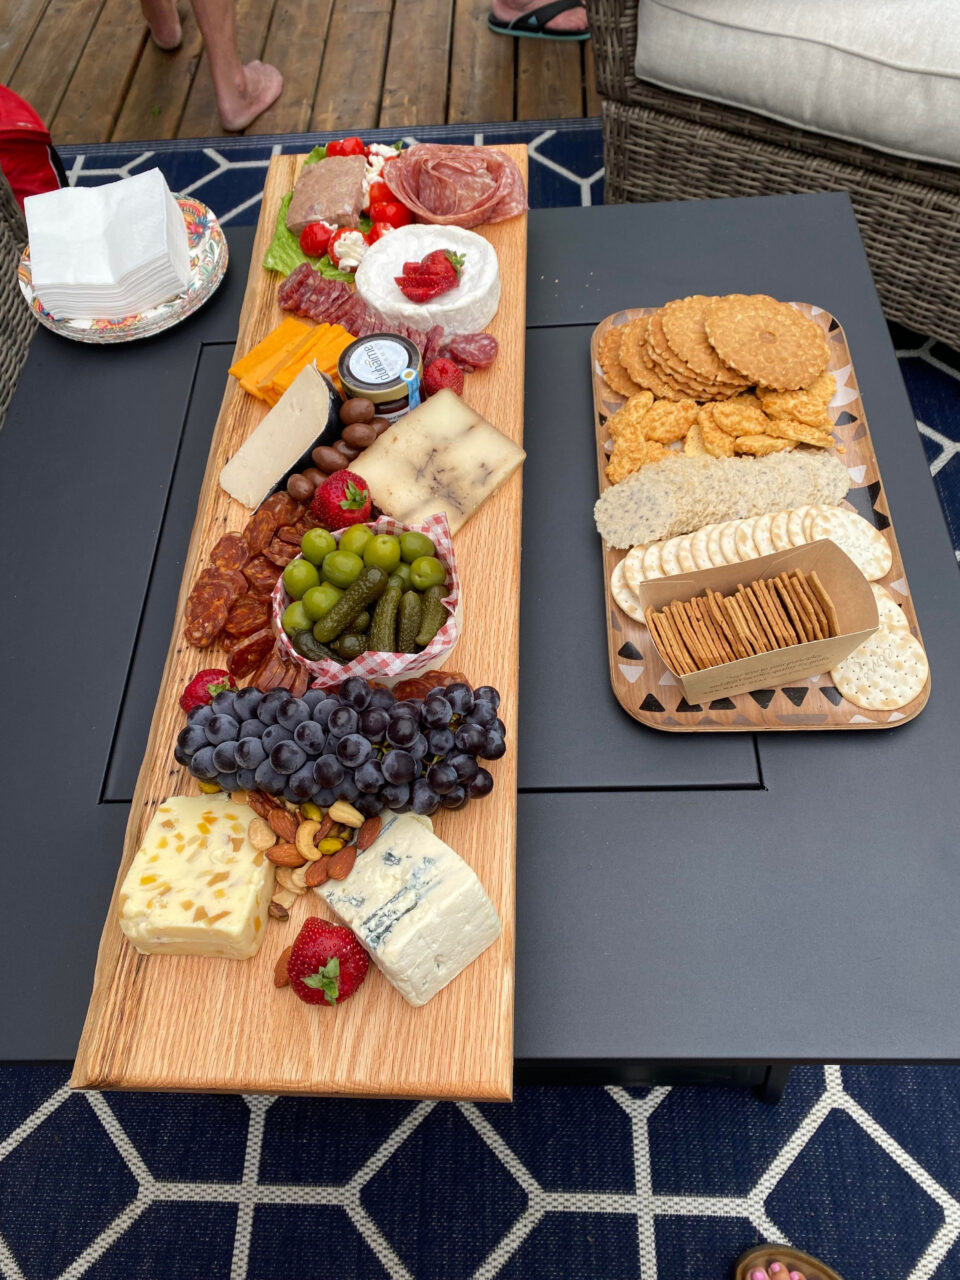 Long wooden board with charcuterie items such as meat, cheese, fruit, crackers etc.